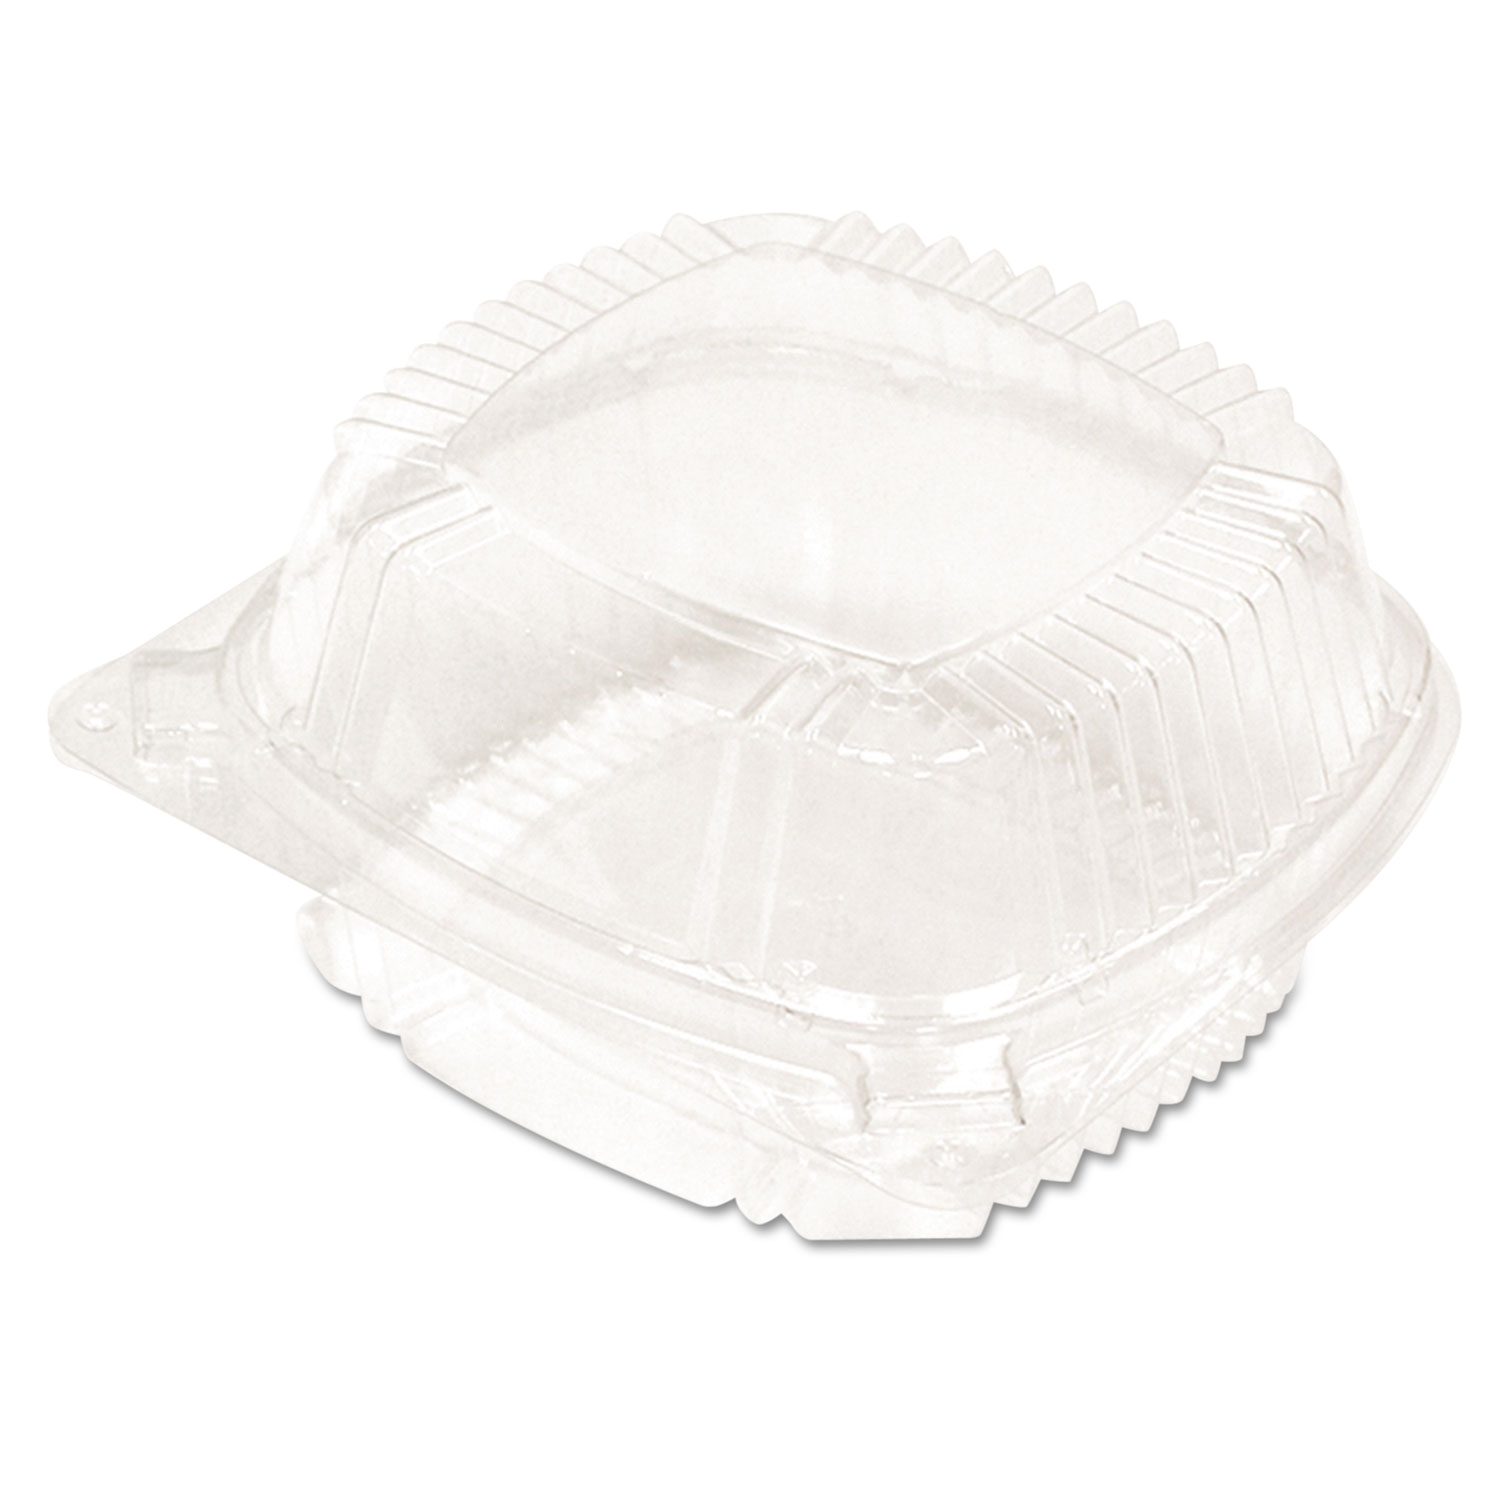  Pactiv YCI810500000 SmartLock Food Containers, Clear, 11oz, 5 1/4w x 5 1/4d x 2 1/2h, 375/Carton (PCTYCI81050) 